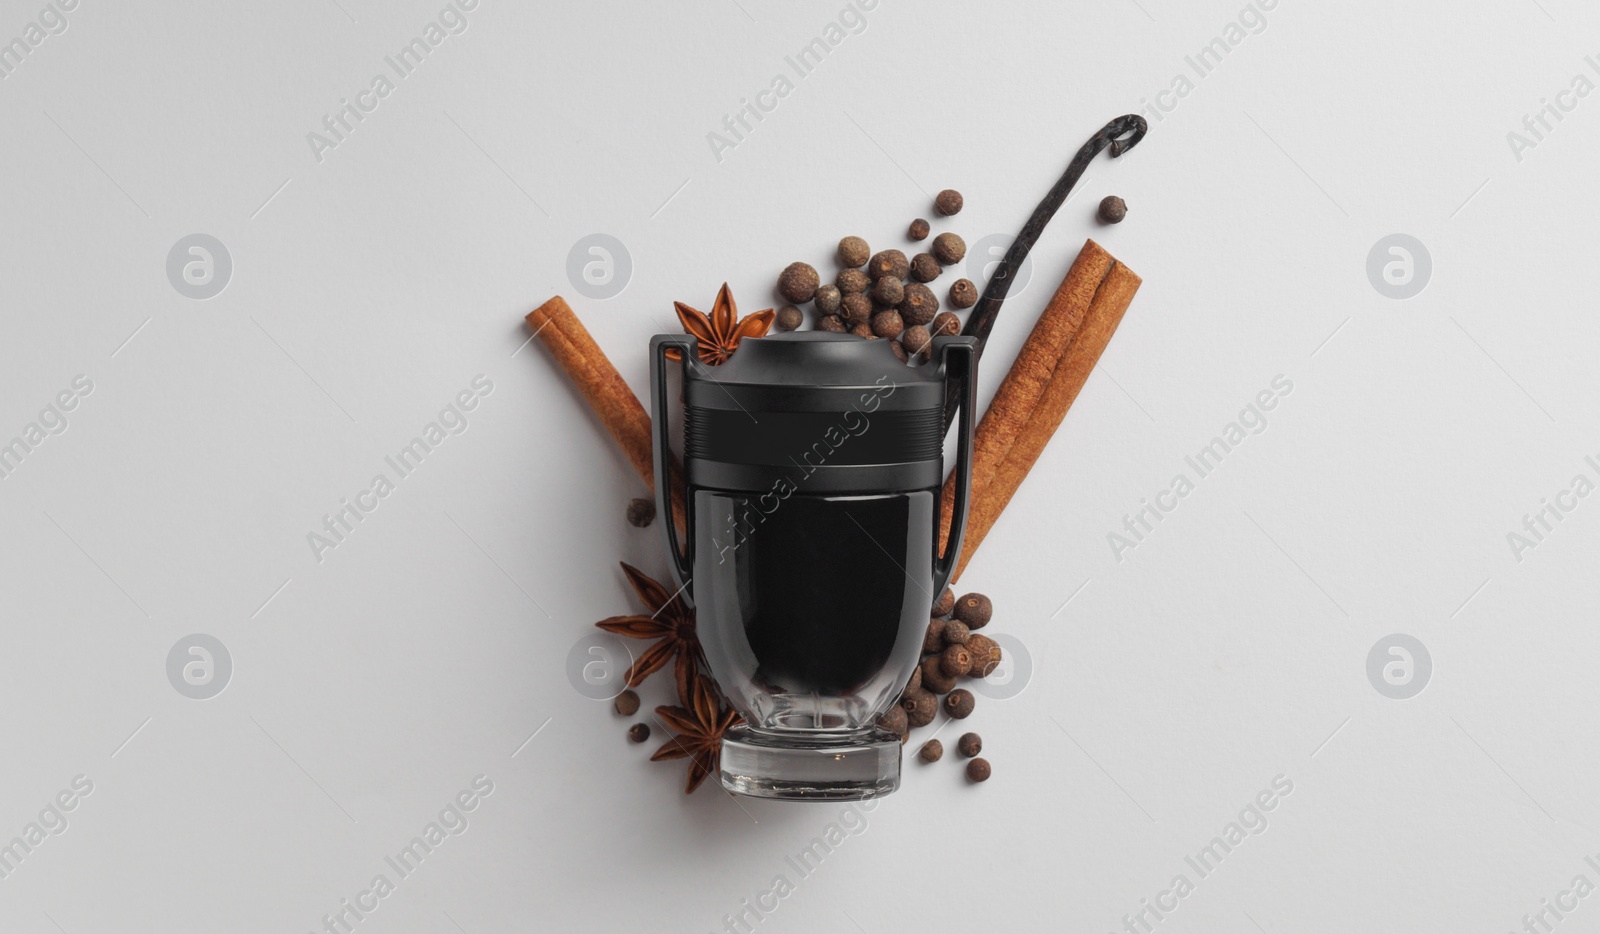 Photo of Bottle of perfume surrounded by different spices on white background, top view